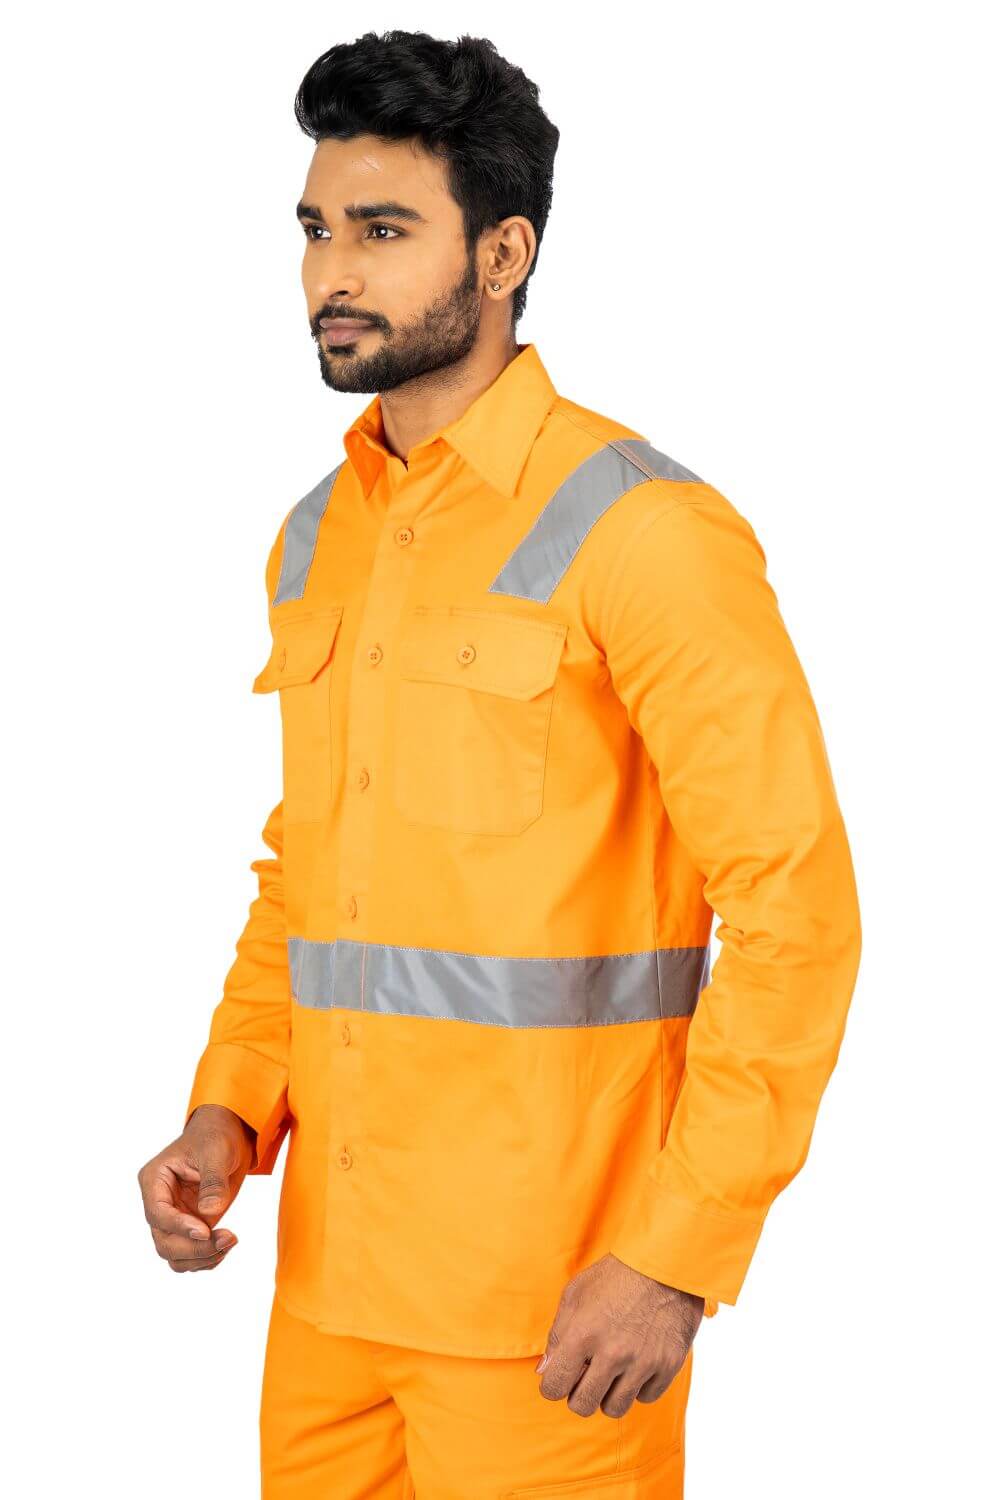 EN 20471 certified with silver reflective tapes Orange Work Shirt for Industrial Use